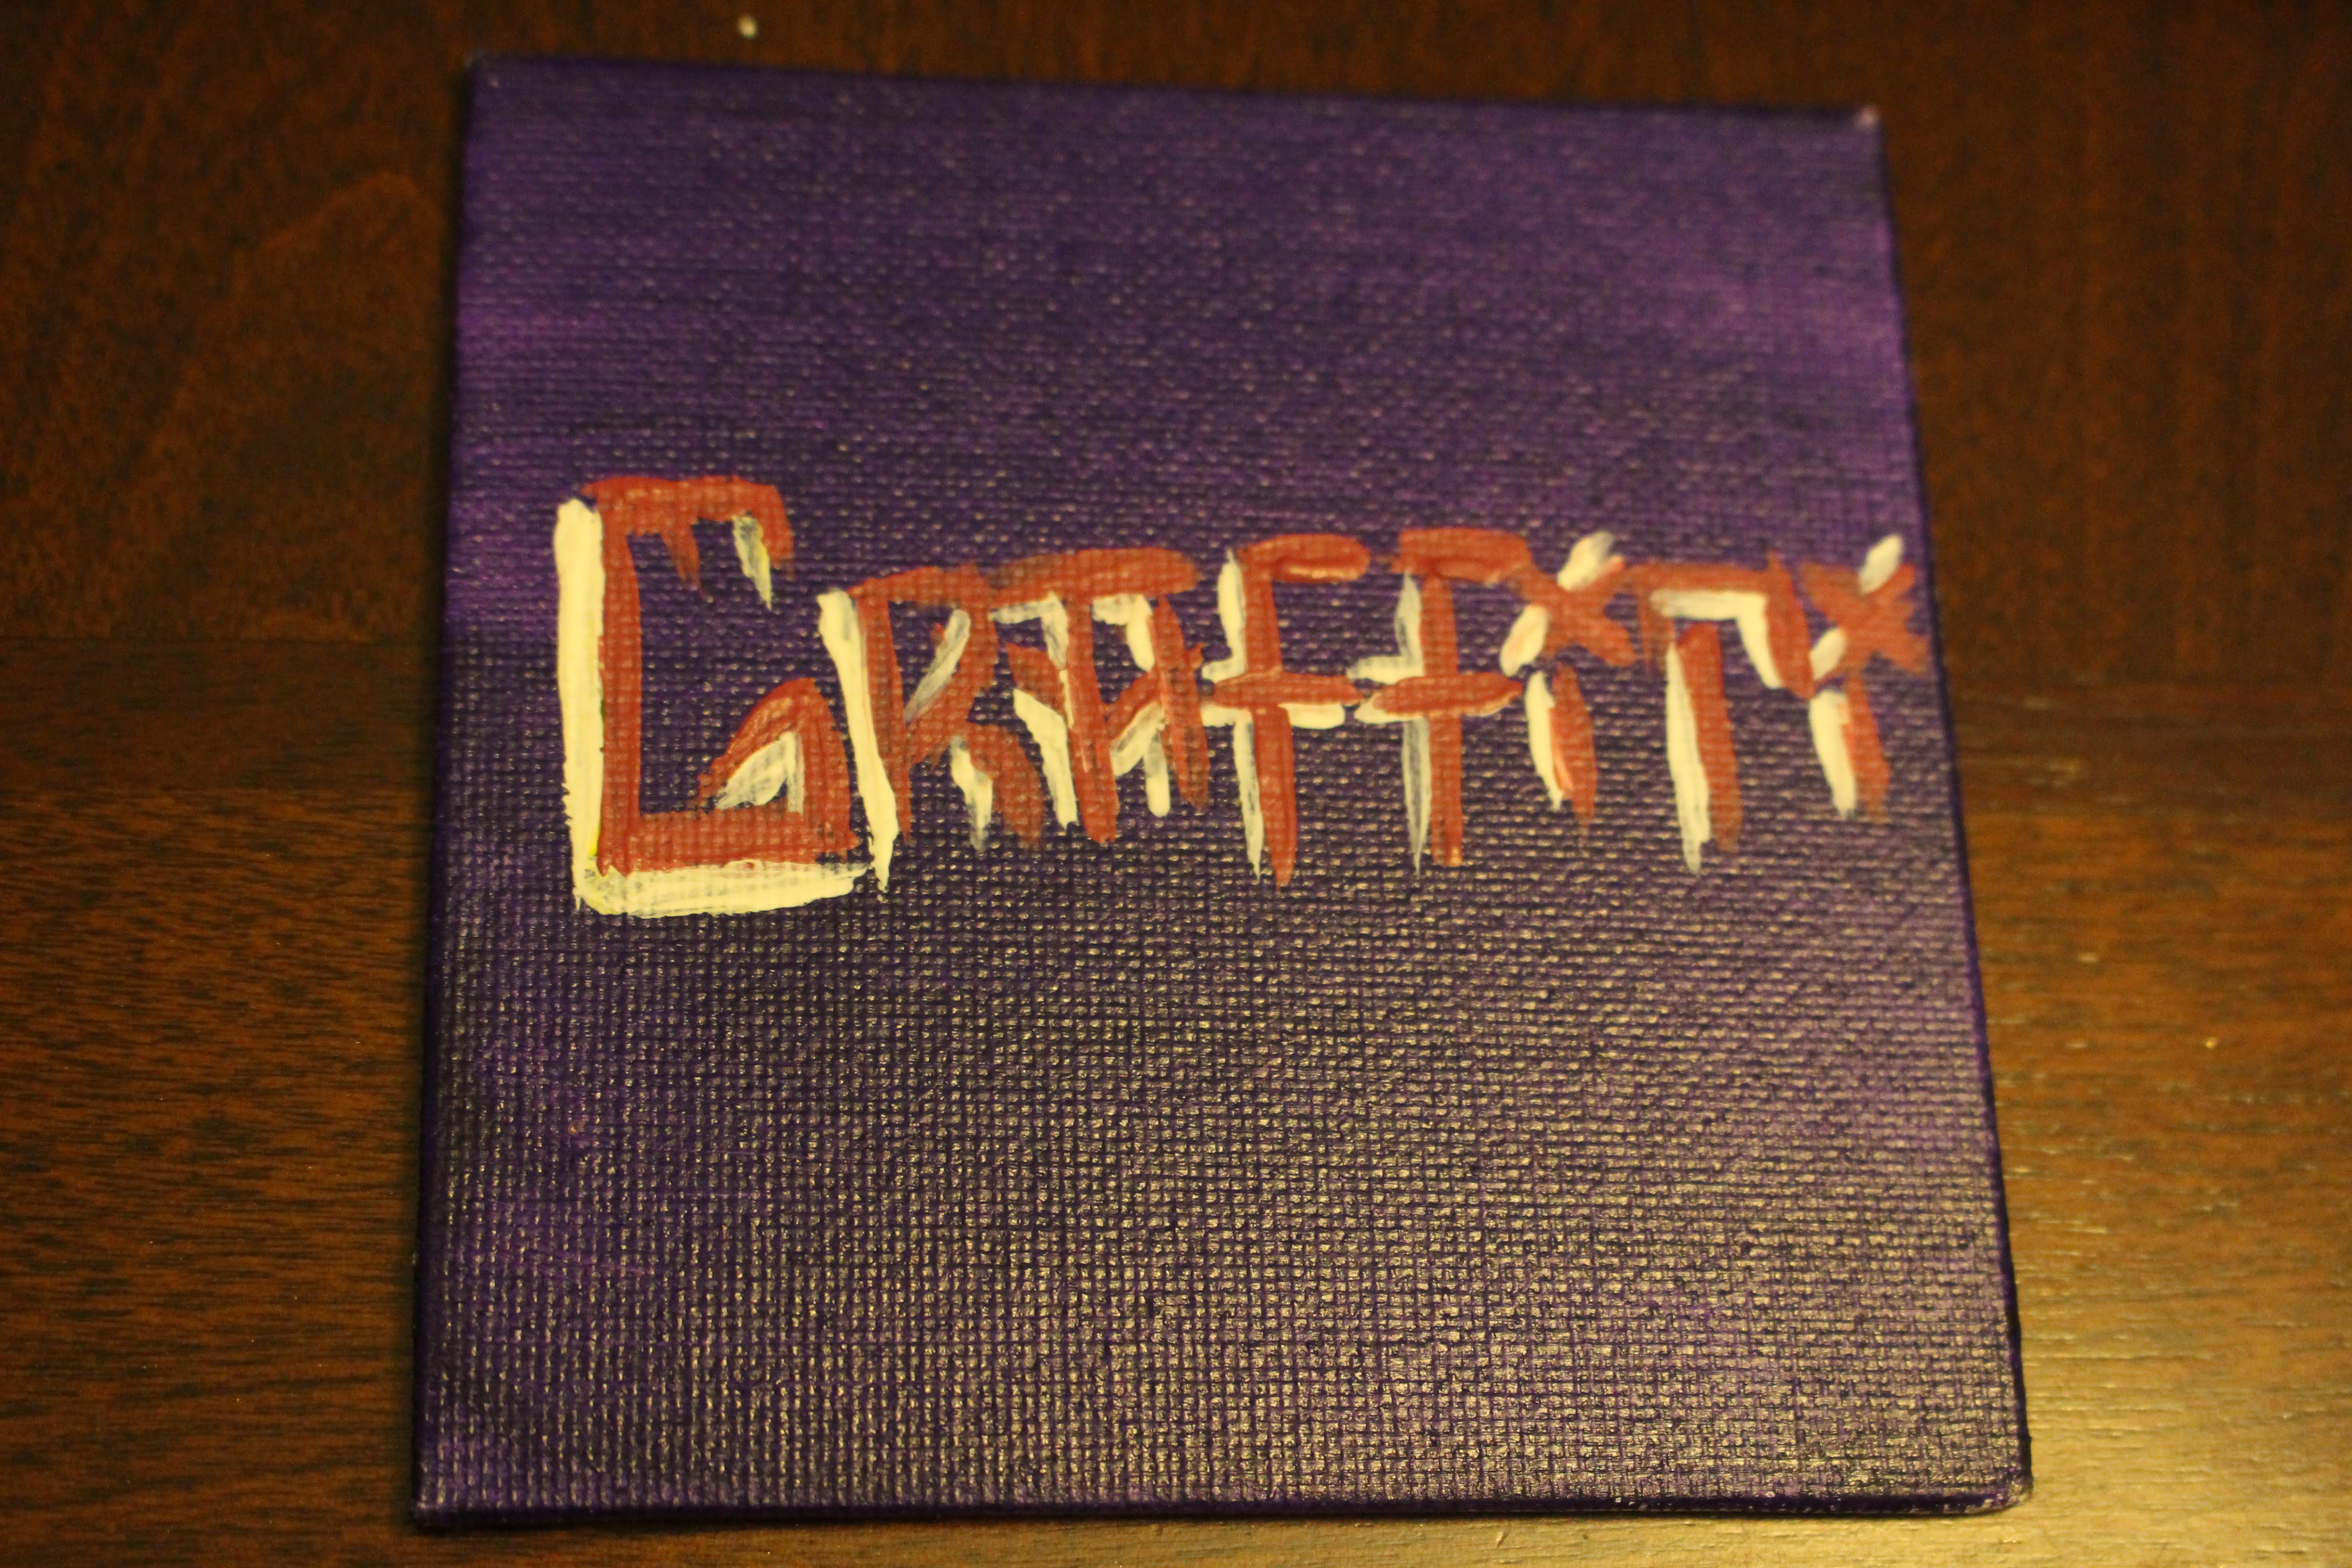 This is a painting of the word ‘Graffiti’ on a mini canvas. This word represents one of the ‘four elements of hip hop”.